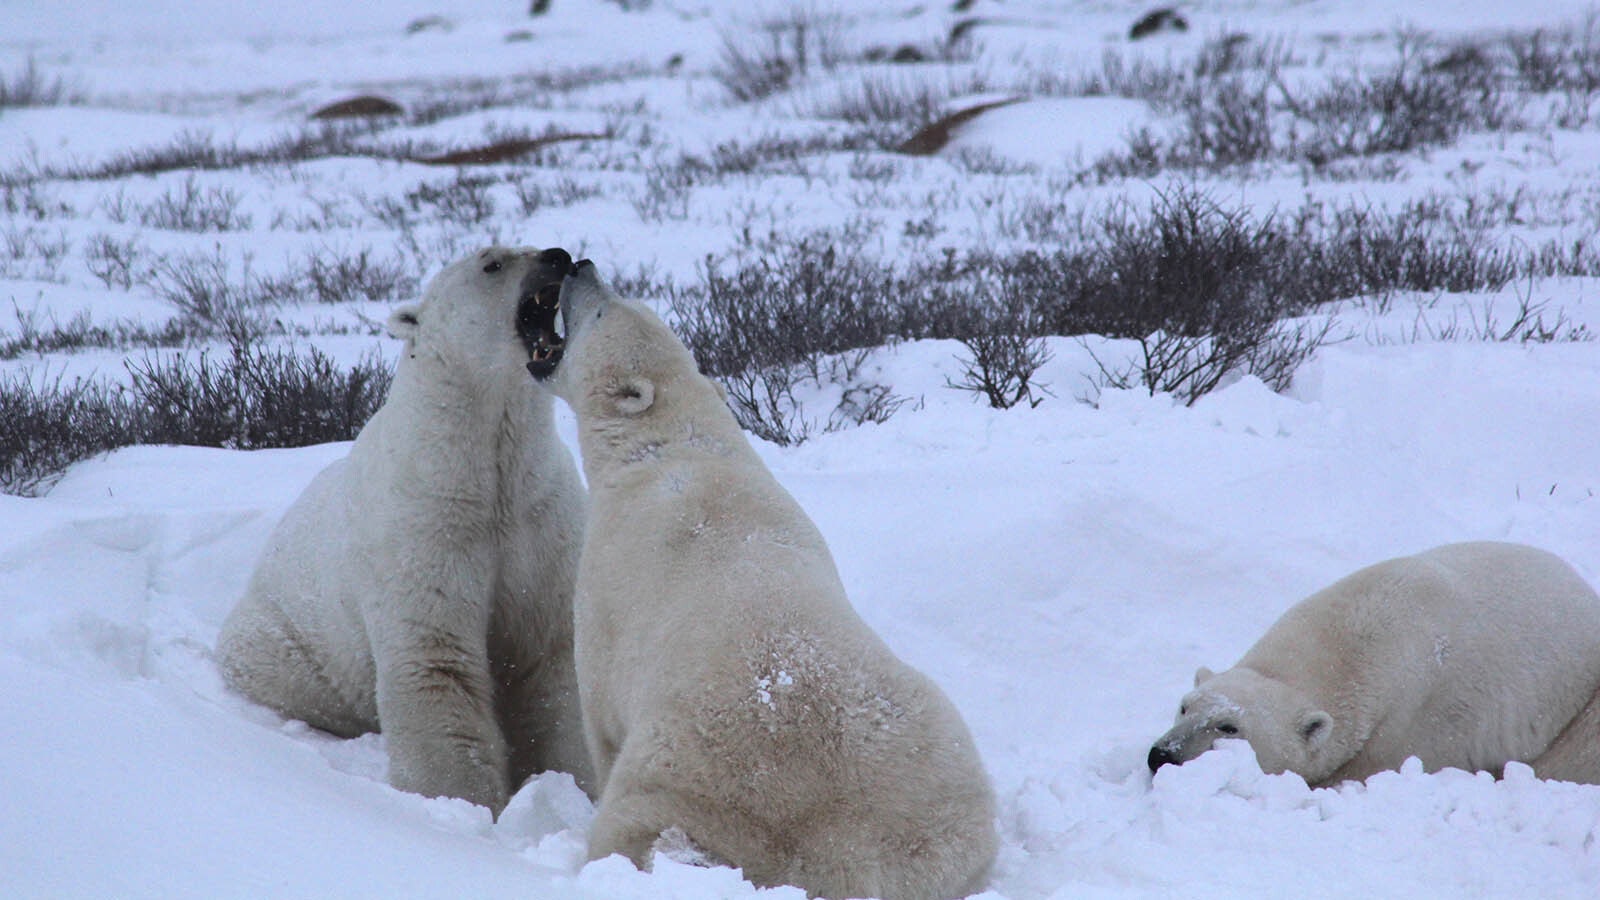 There are about 700 polar bears around the area near Churchill, Manitoba, Canada, which makes it a pretty good bet visitors get to see plenty of bear activity.